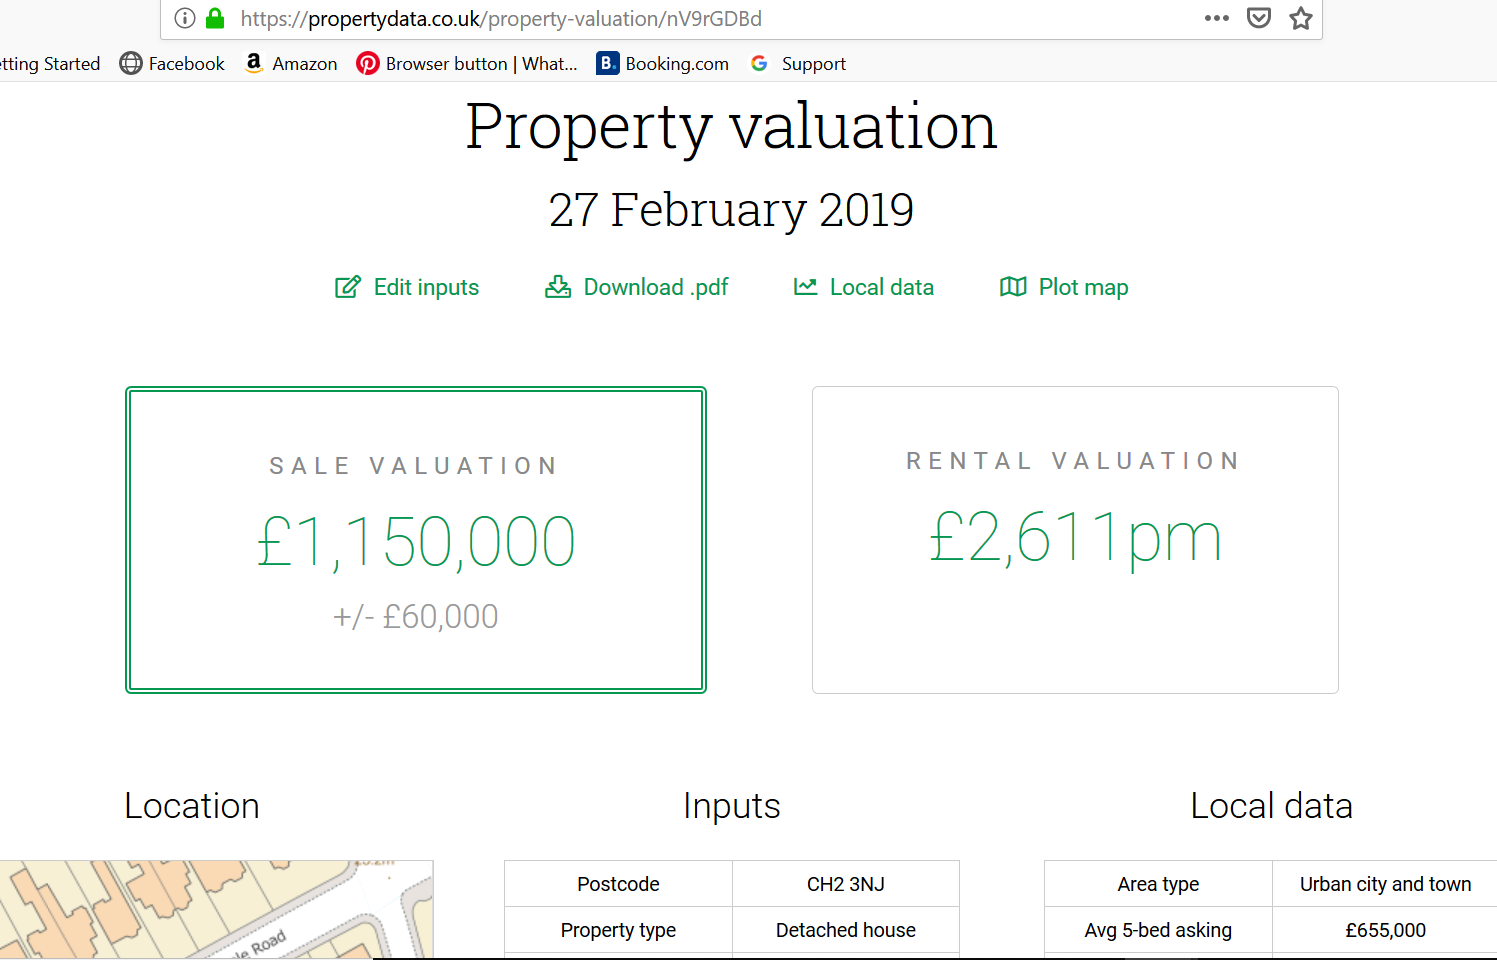 Bartletts Solicitors Property Valuations.